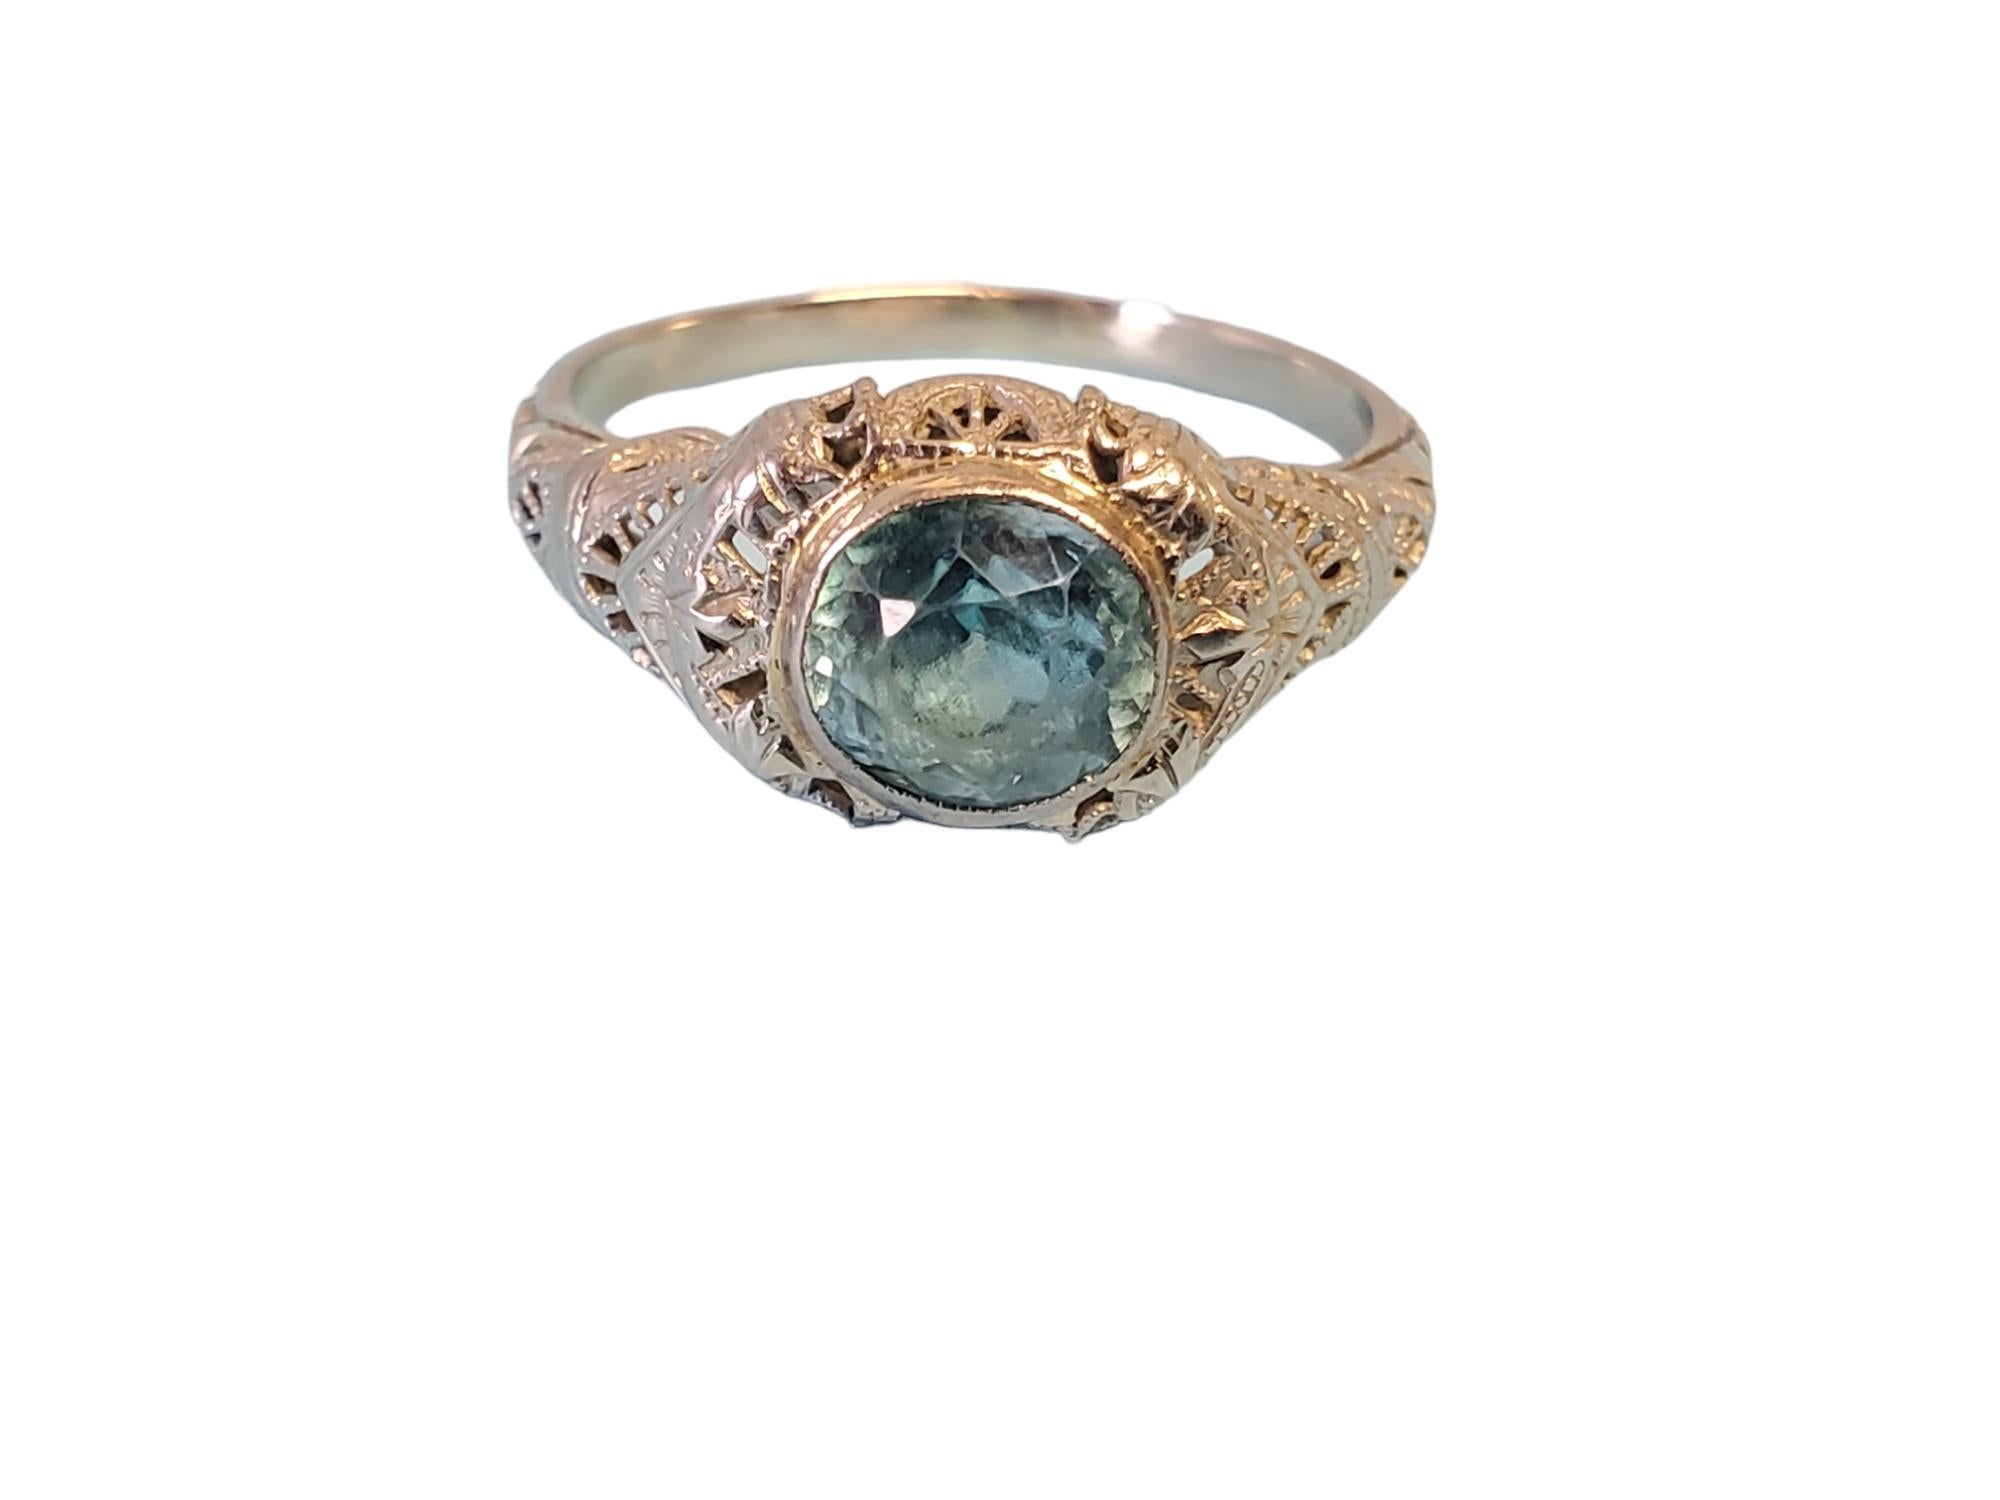 Antique Art Deco 18k white gold Filigree Ring with 7.5mm Blue Zircon In Good Condition For Sale In Overland Park, KS